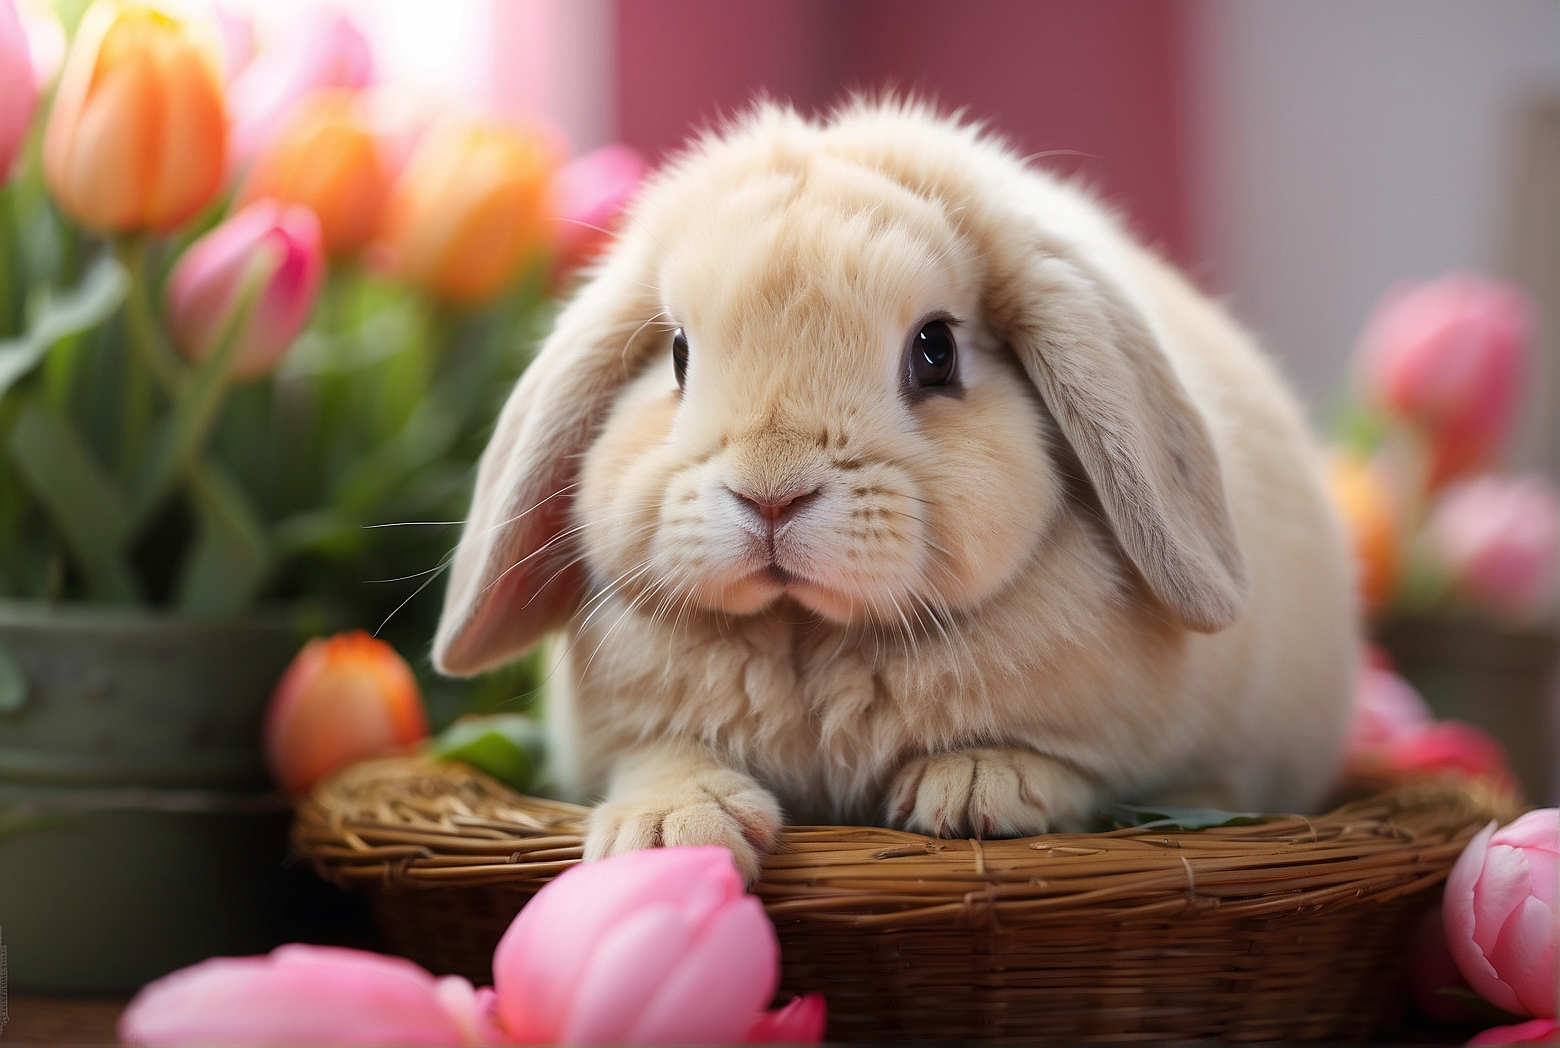 The Ultimate Guide on How to Care for Holland Lop Bunnies